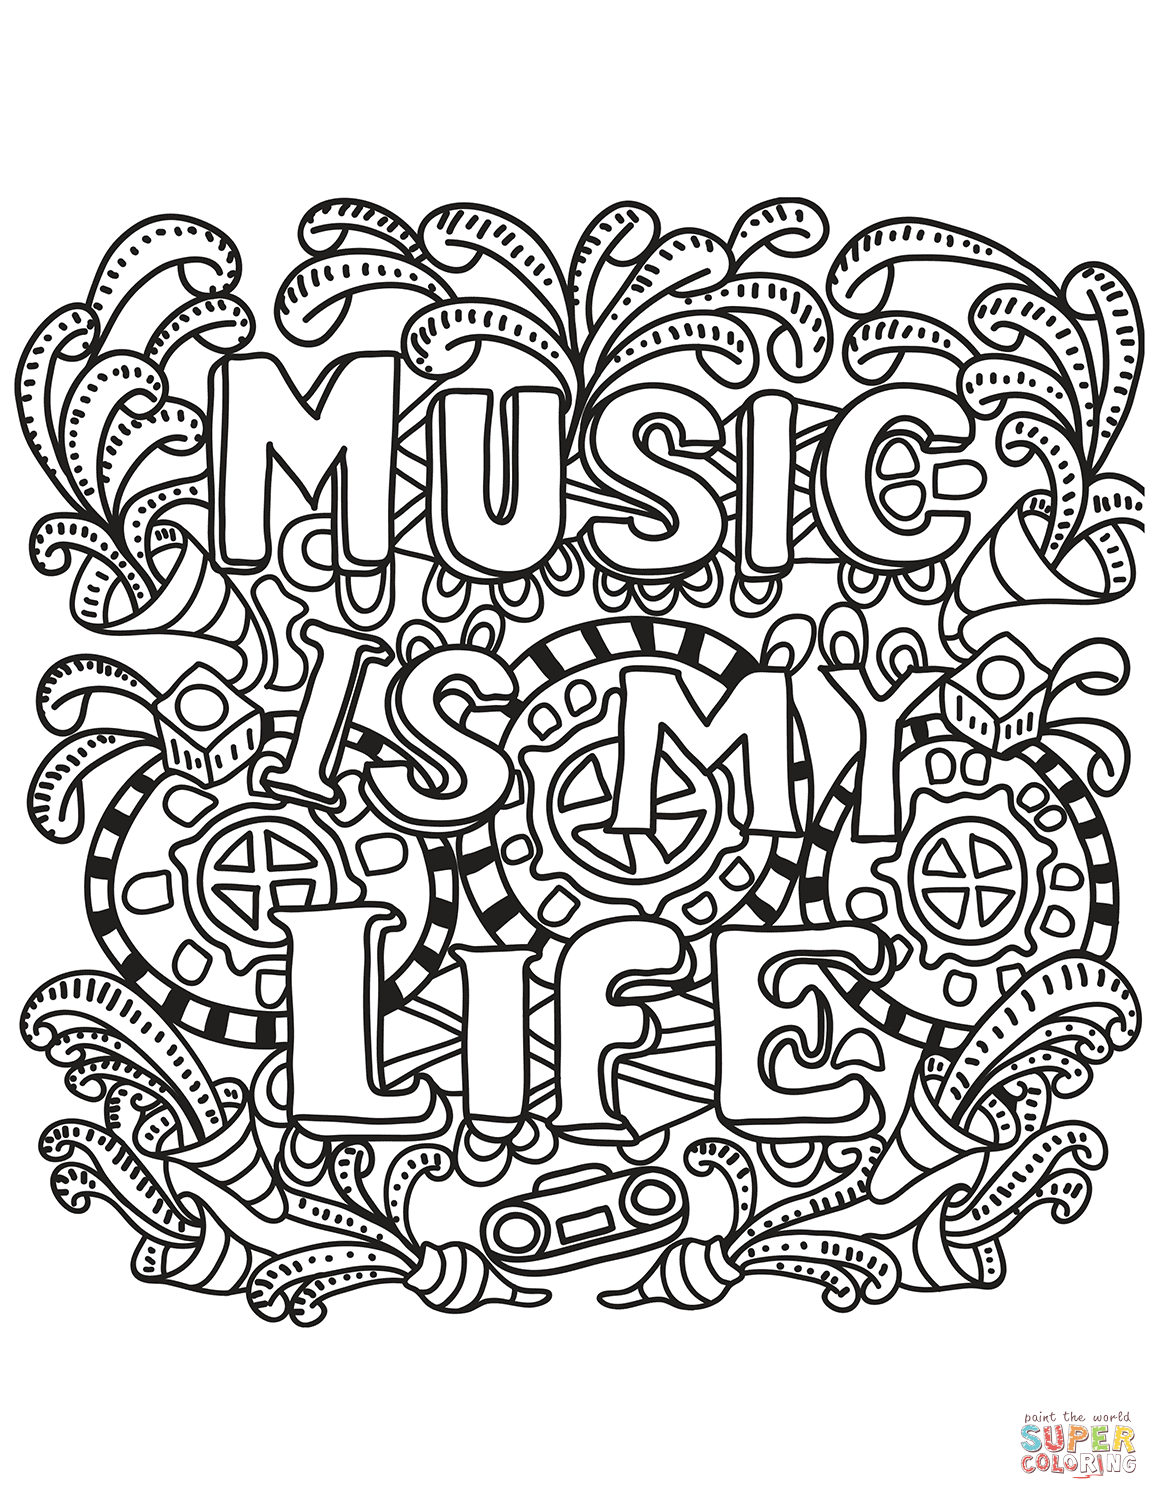 Music is My Life coloring page | Free Printable Coloring Pages